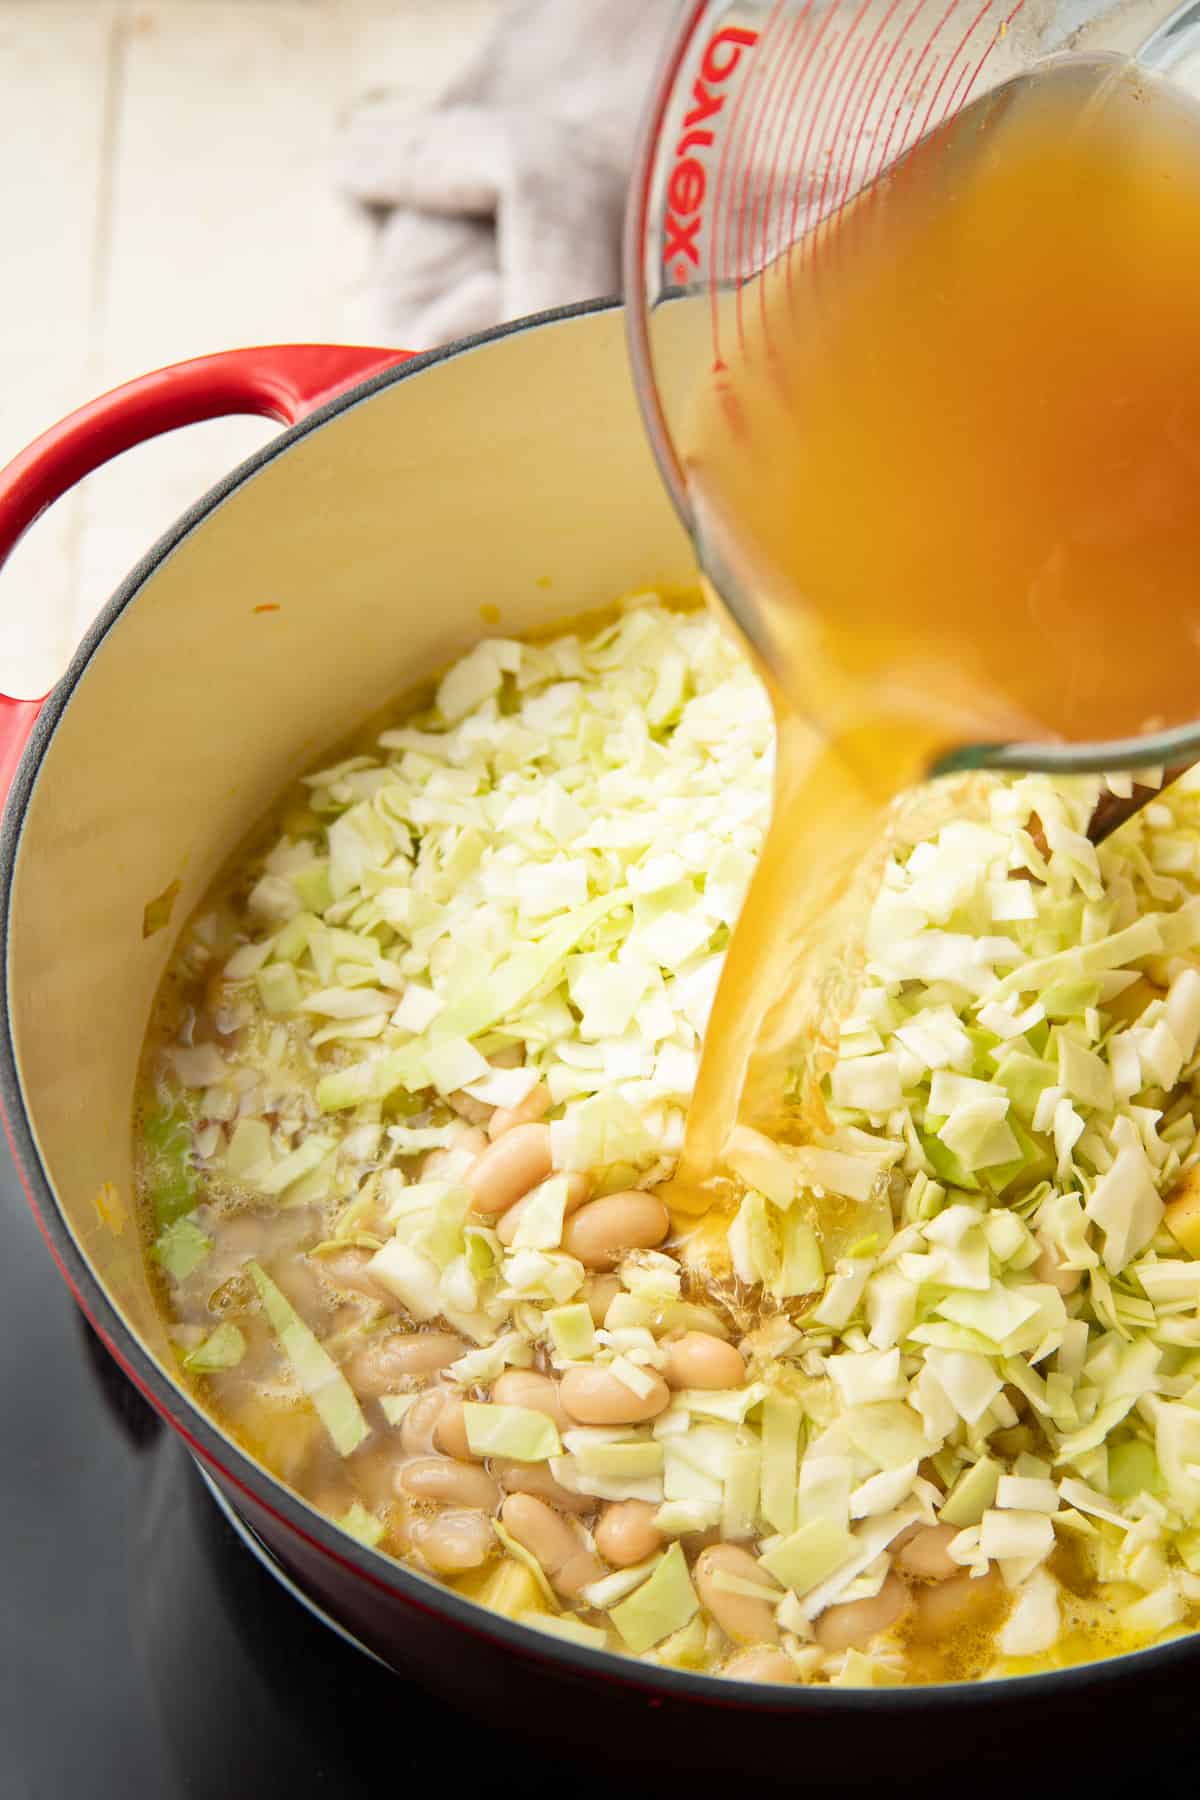 Broth being poured into a pot containing cabbage and white beans,